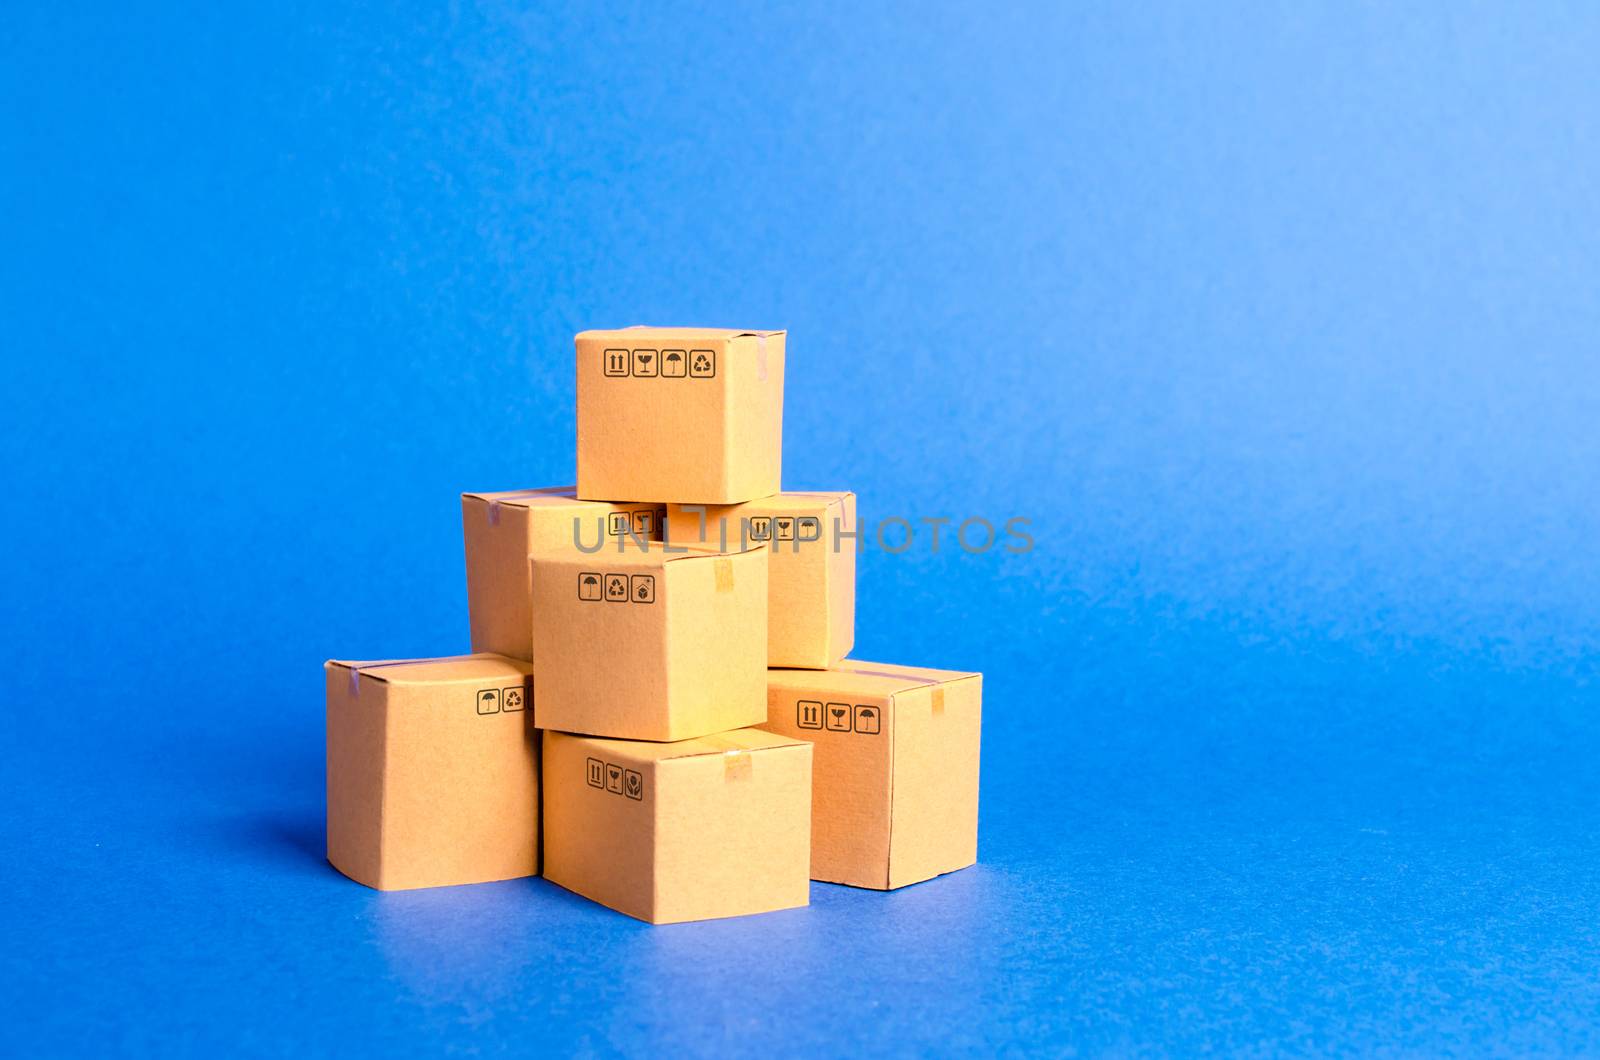 A pile of cardboard boxes. products, goods, commerce and retail. E-commerce, sale of goods through online trading platform. Freight shipping, deliver. sales of goods and services. Warehouse, stock by iLixe48